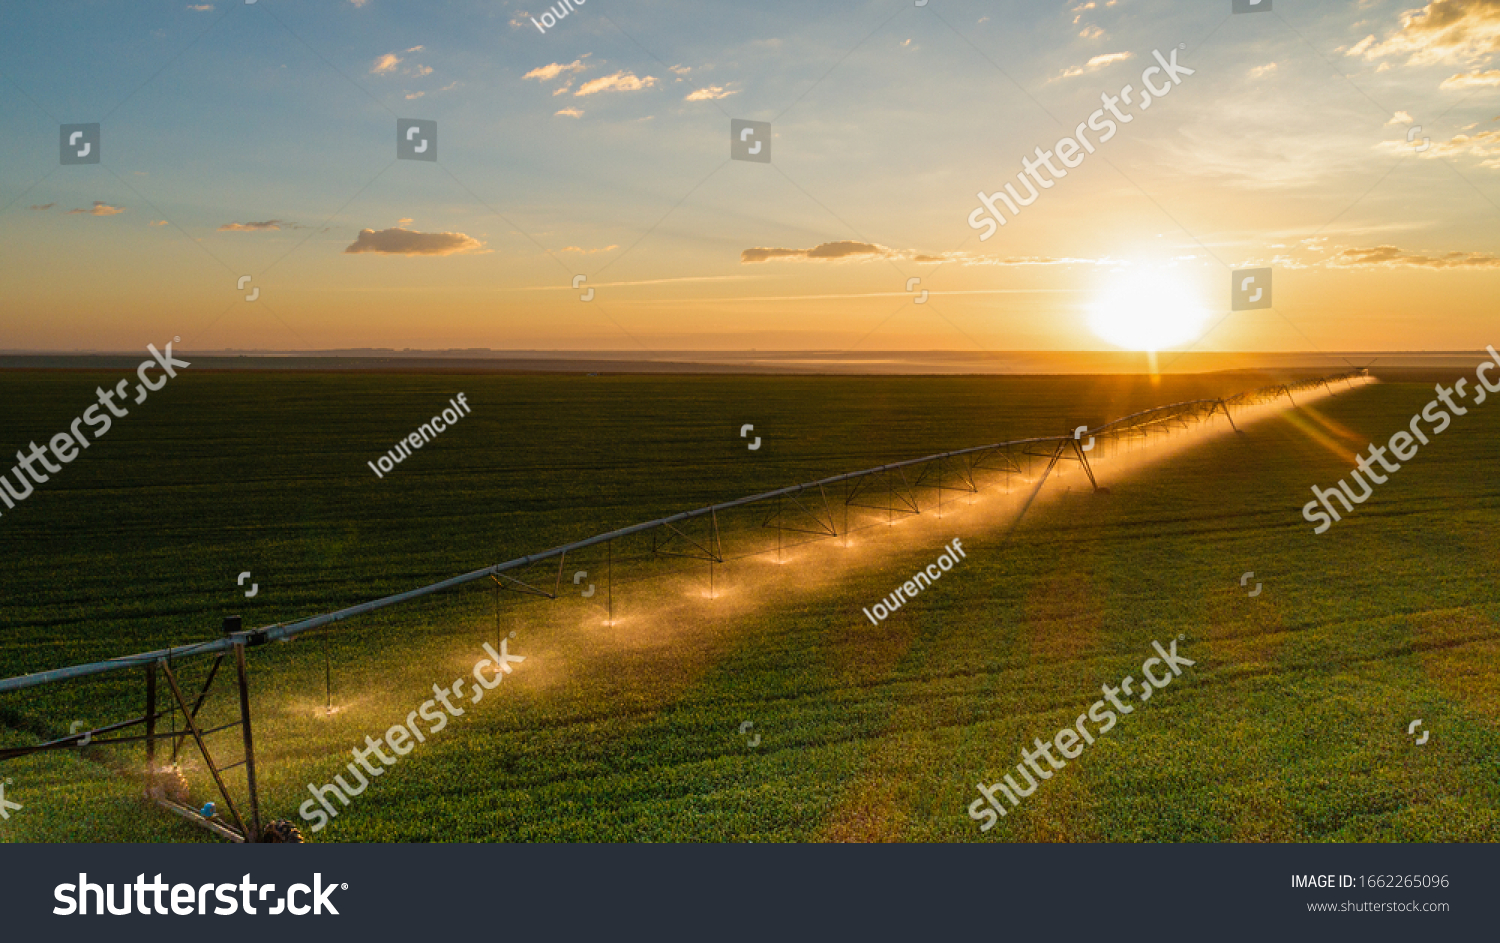 Agriculture - Aerial image, Pivot irrigation used to water plants on a farm. sunset, circular pivot irrigation with drone - Agribusiness #1662265096